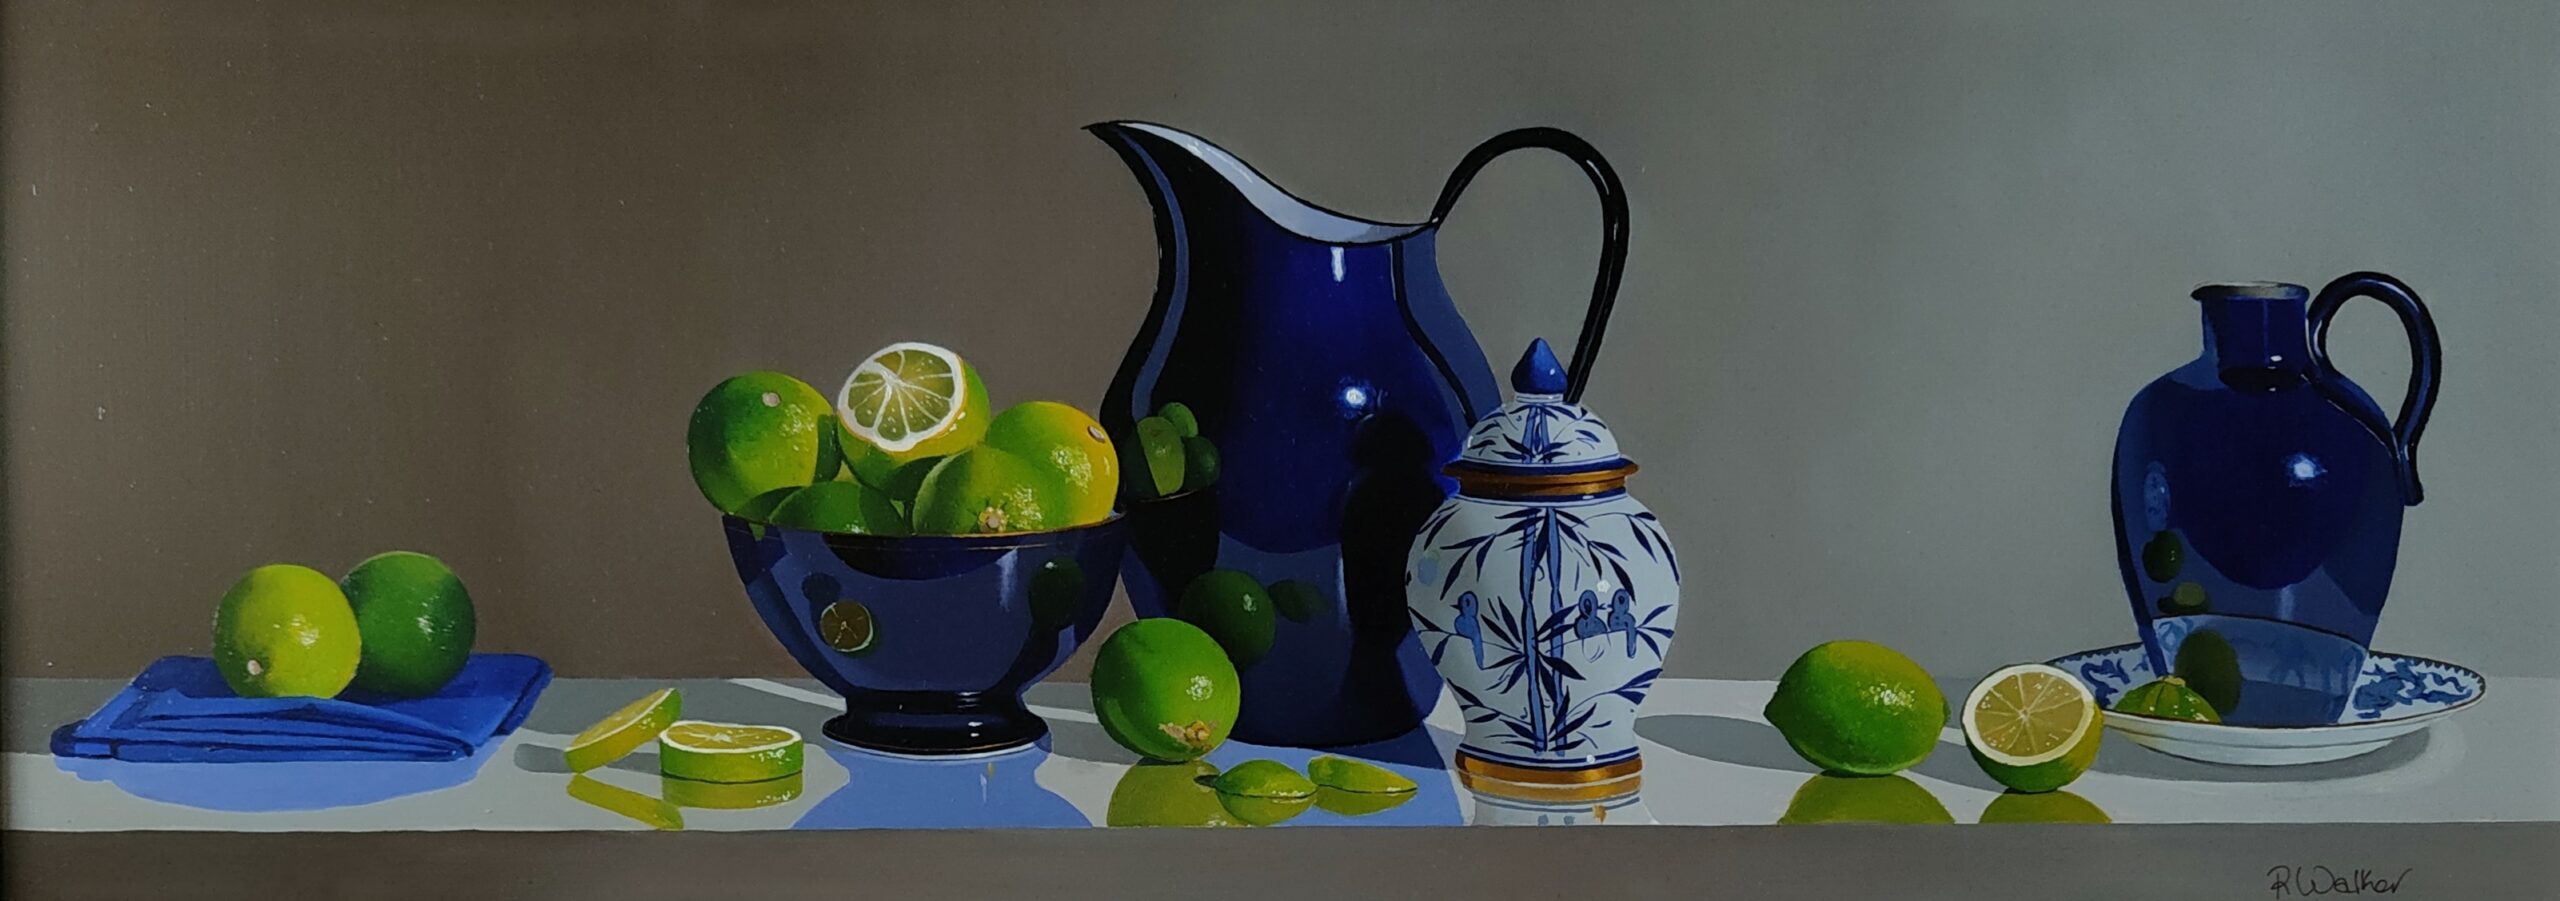 Blue Enamel and Limes